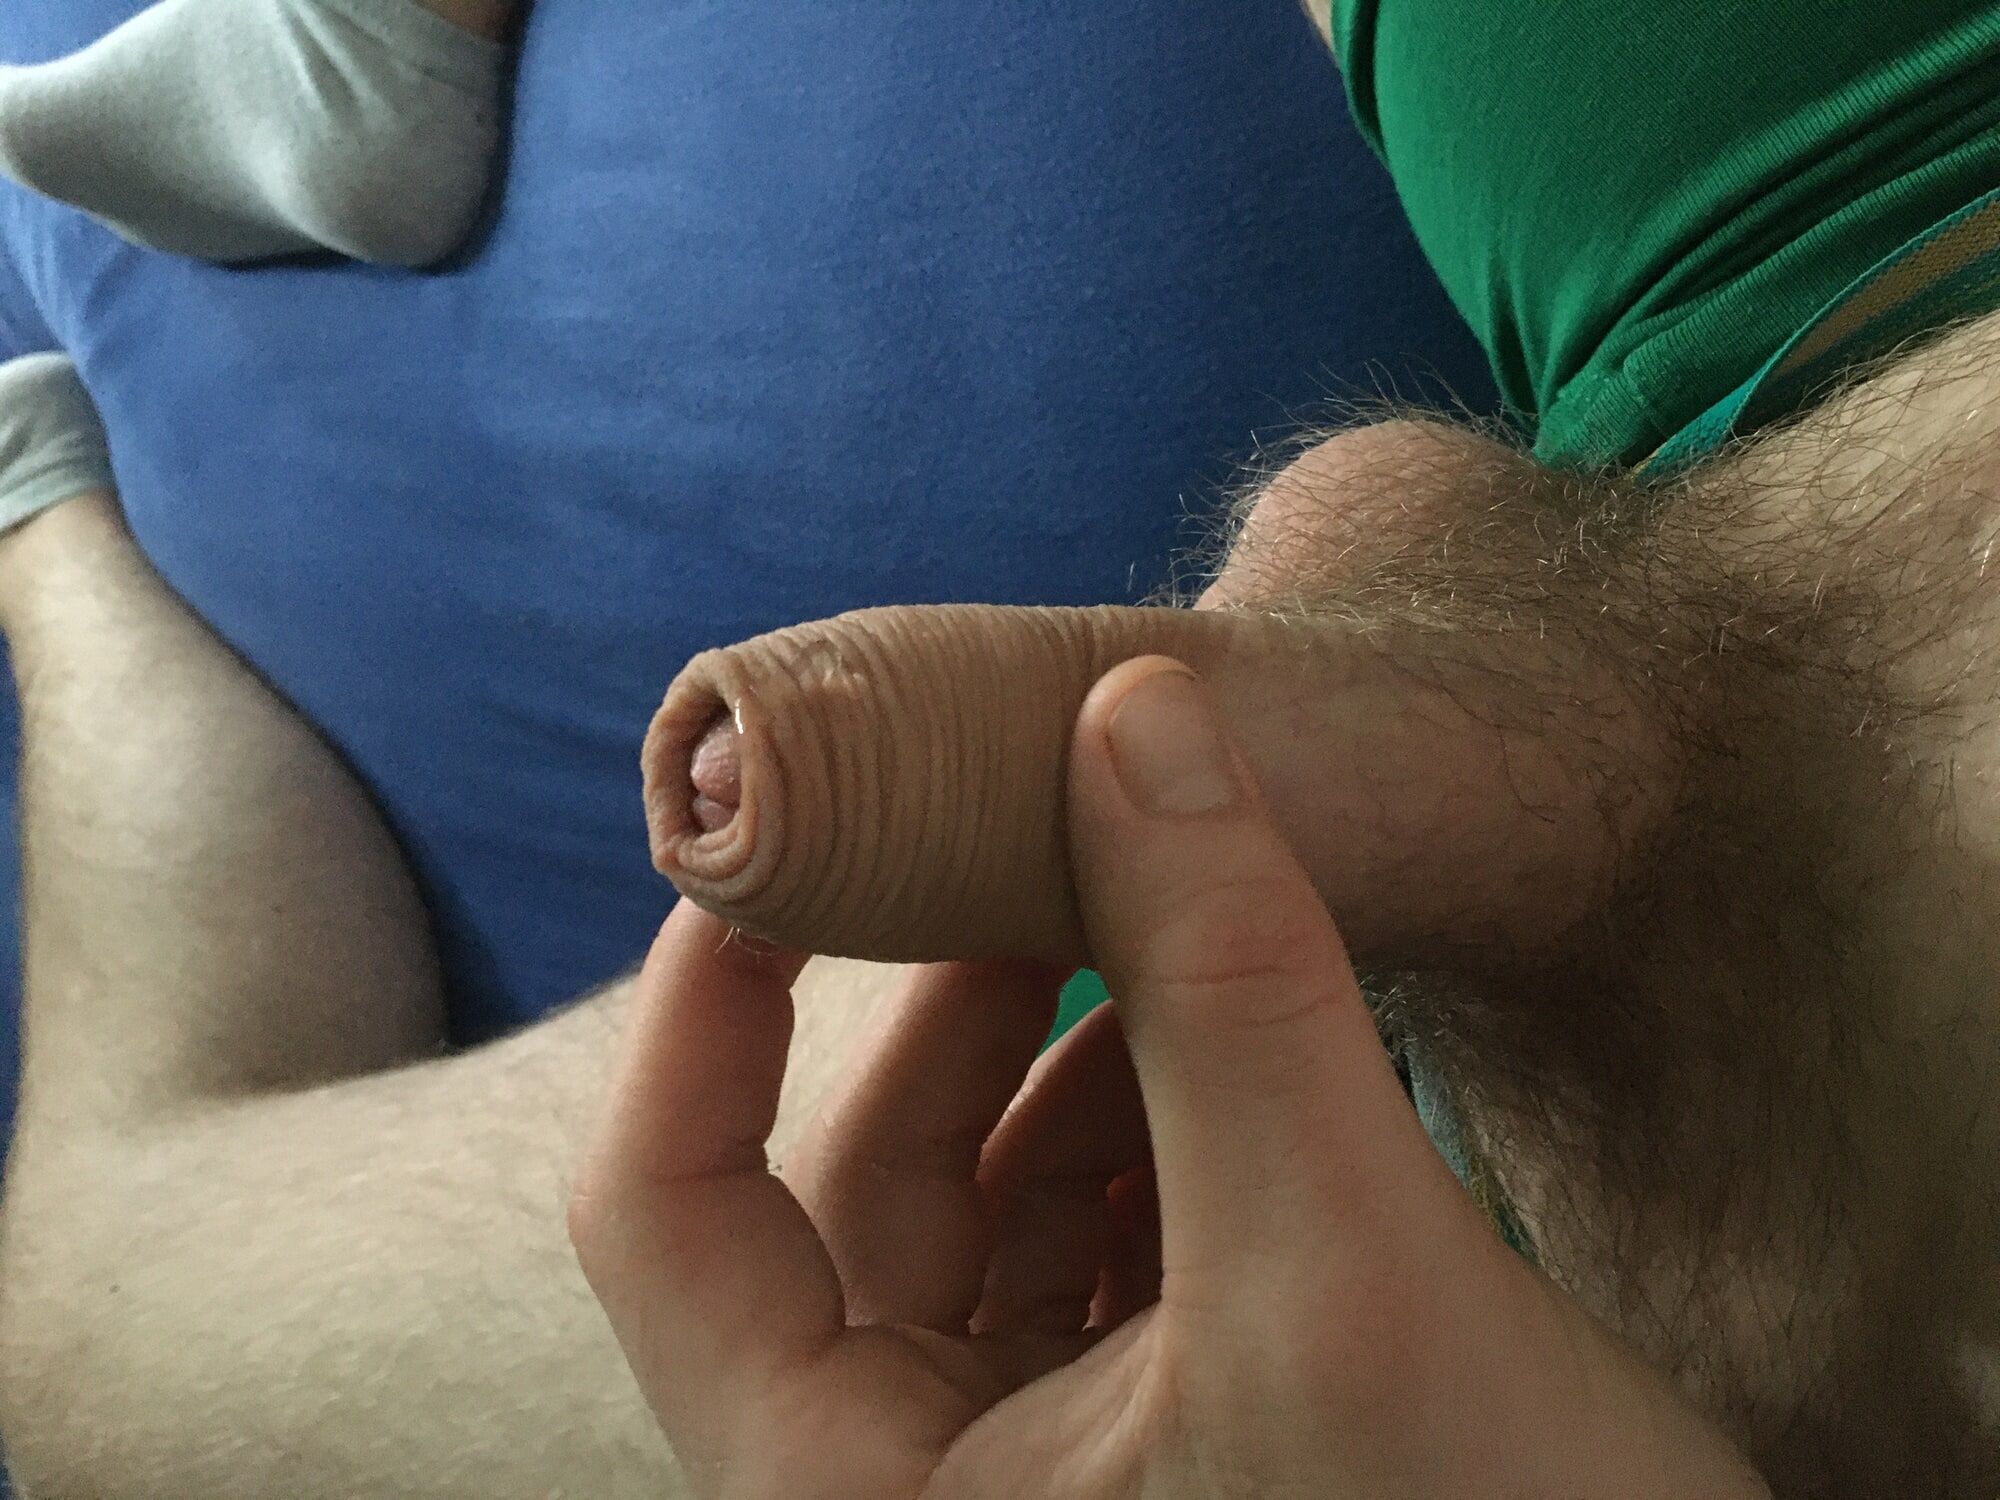 Hairy Dick And Balls Cockhead Foreskin Play With Pre- Cum #7